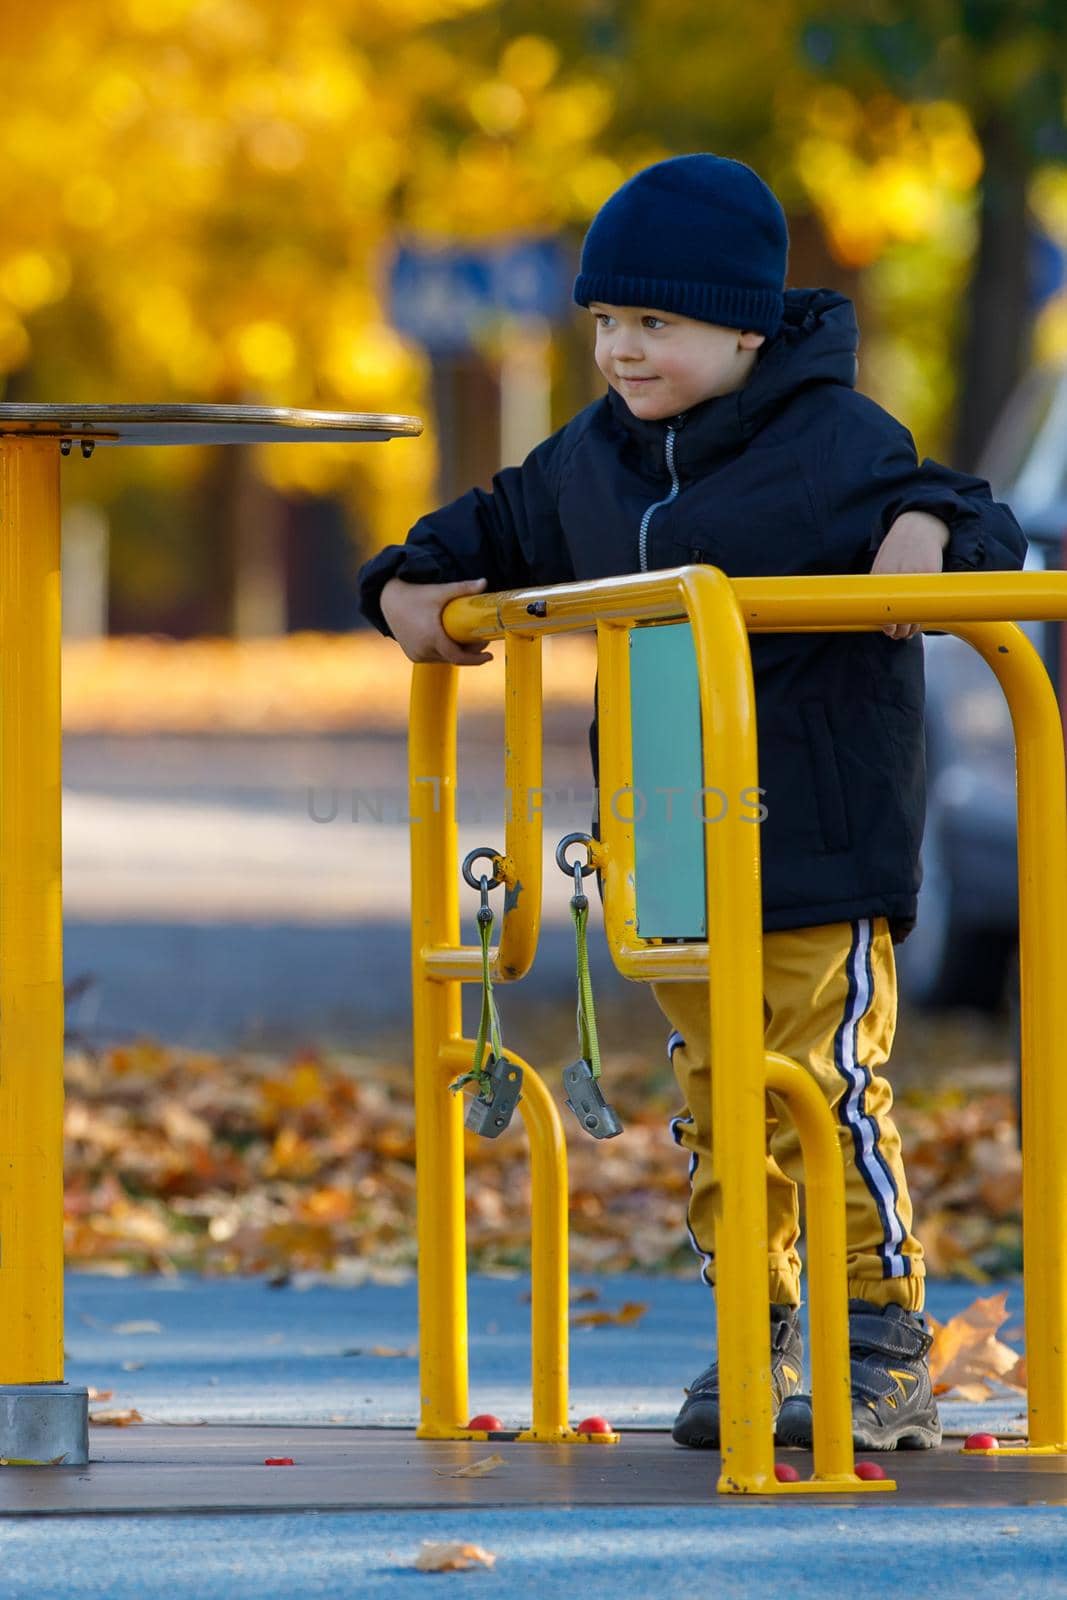 Little boy play on the playground in the park. Child spinning a yellow carousel. Autumn season with bright yellow trees in the background. Vertical photo. by Lincikas